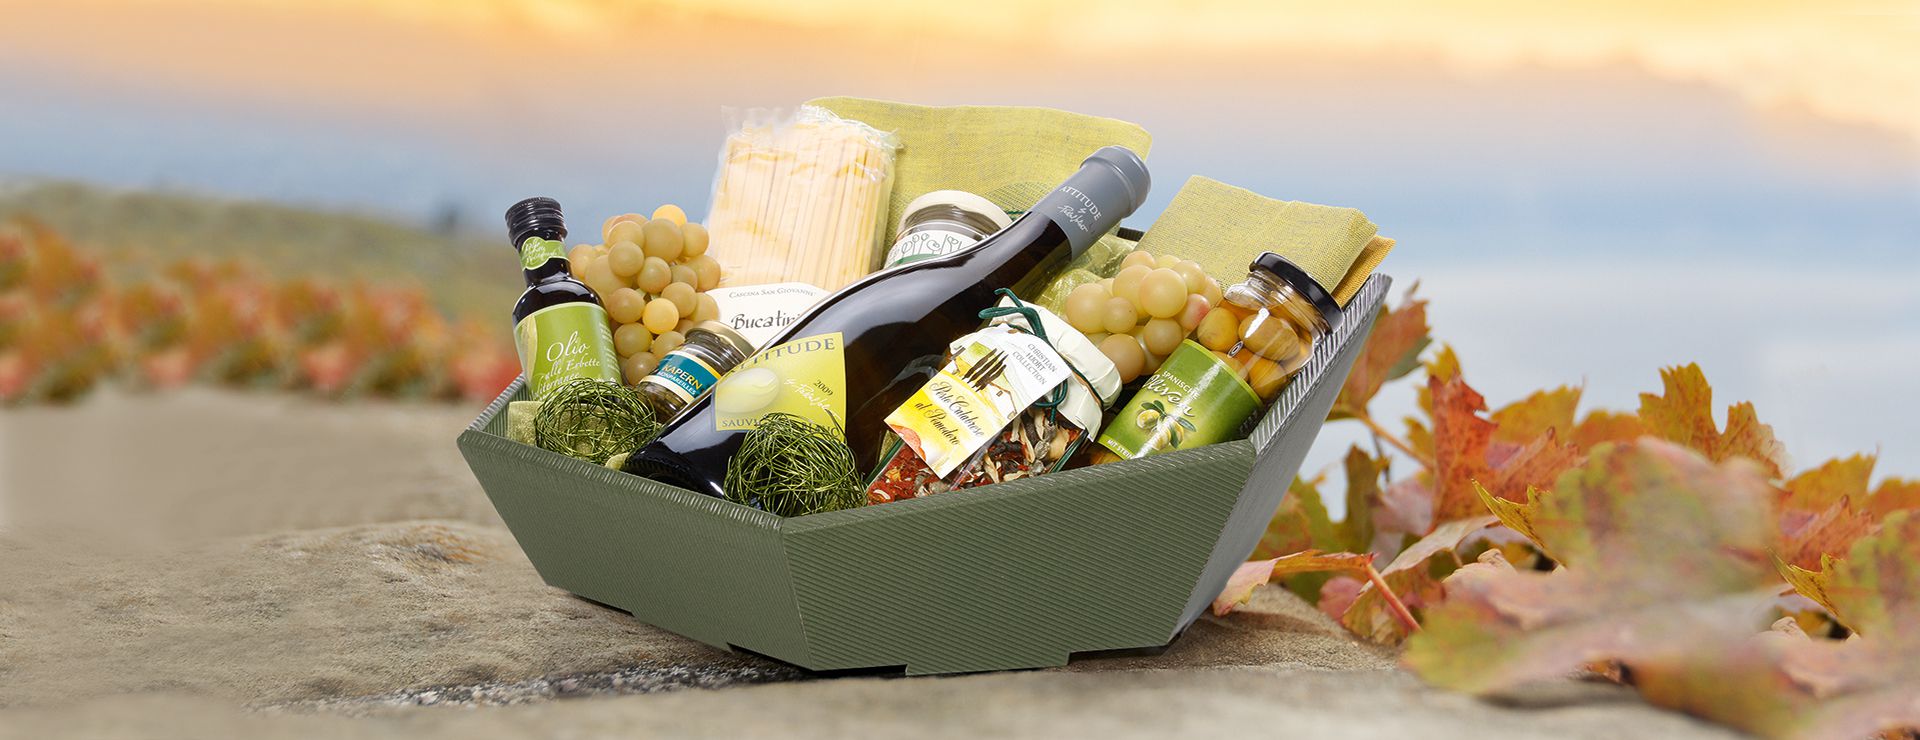 Hexagonal gift basket in open face board and bevel to the front with white wine and olives.